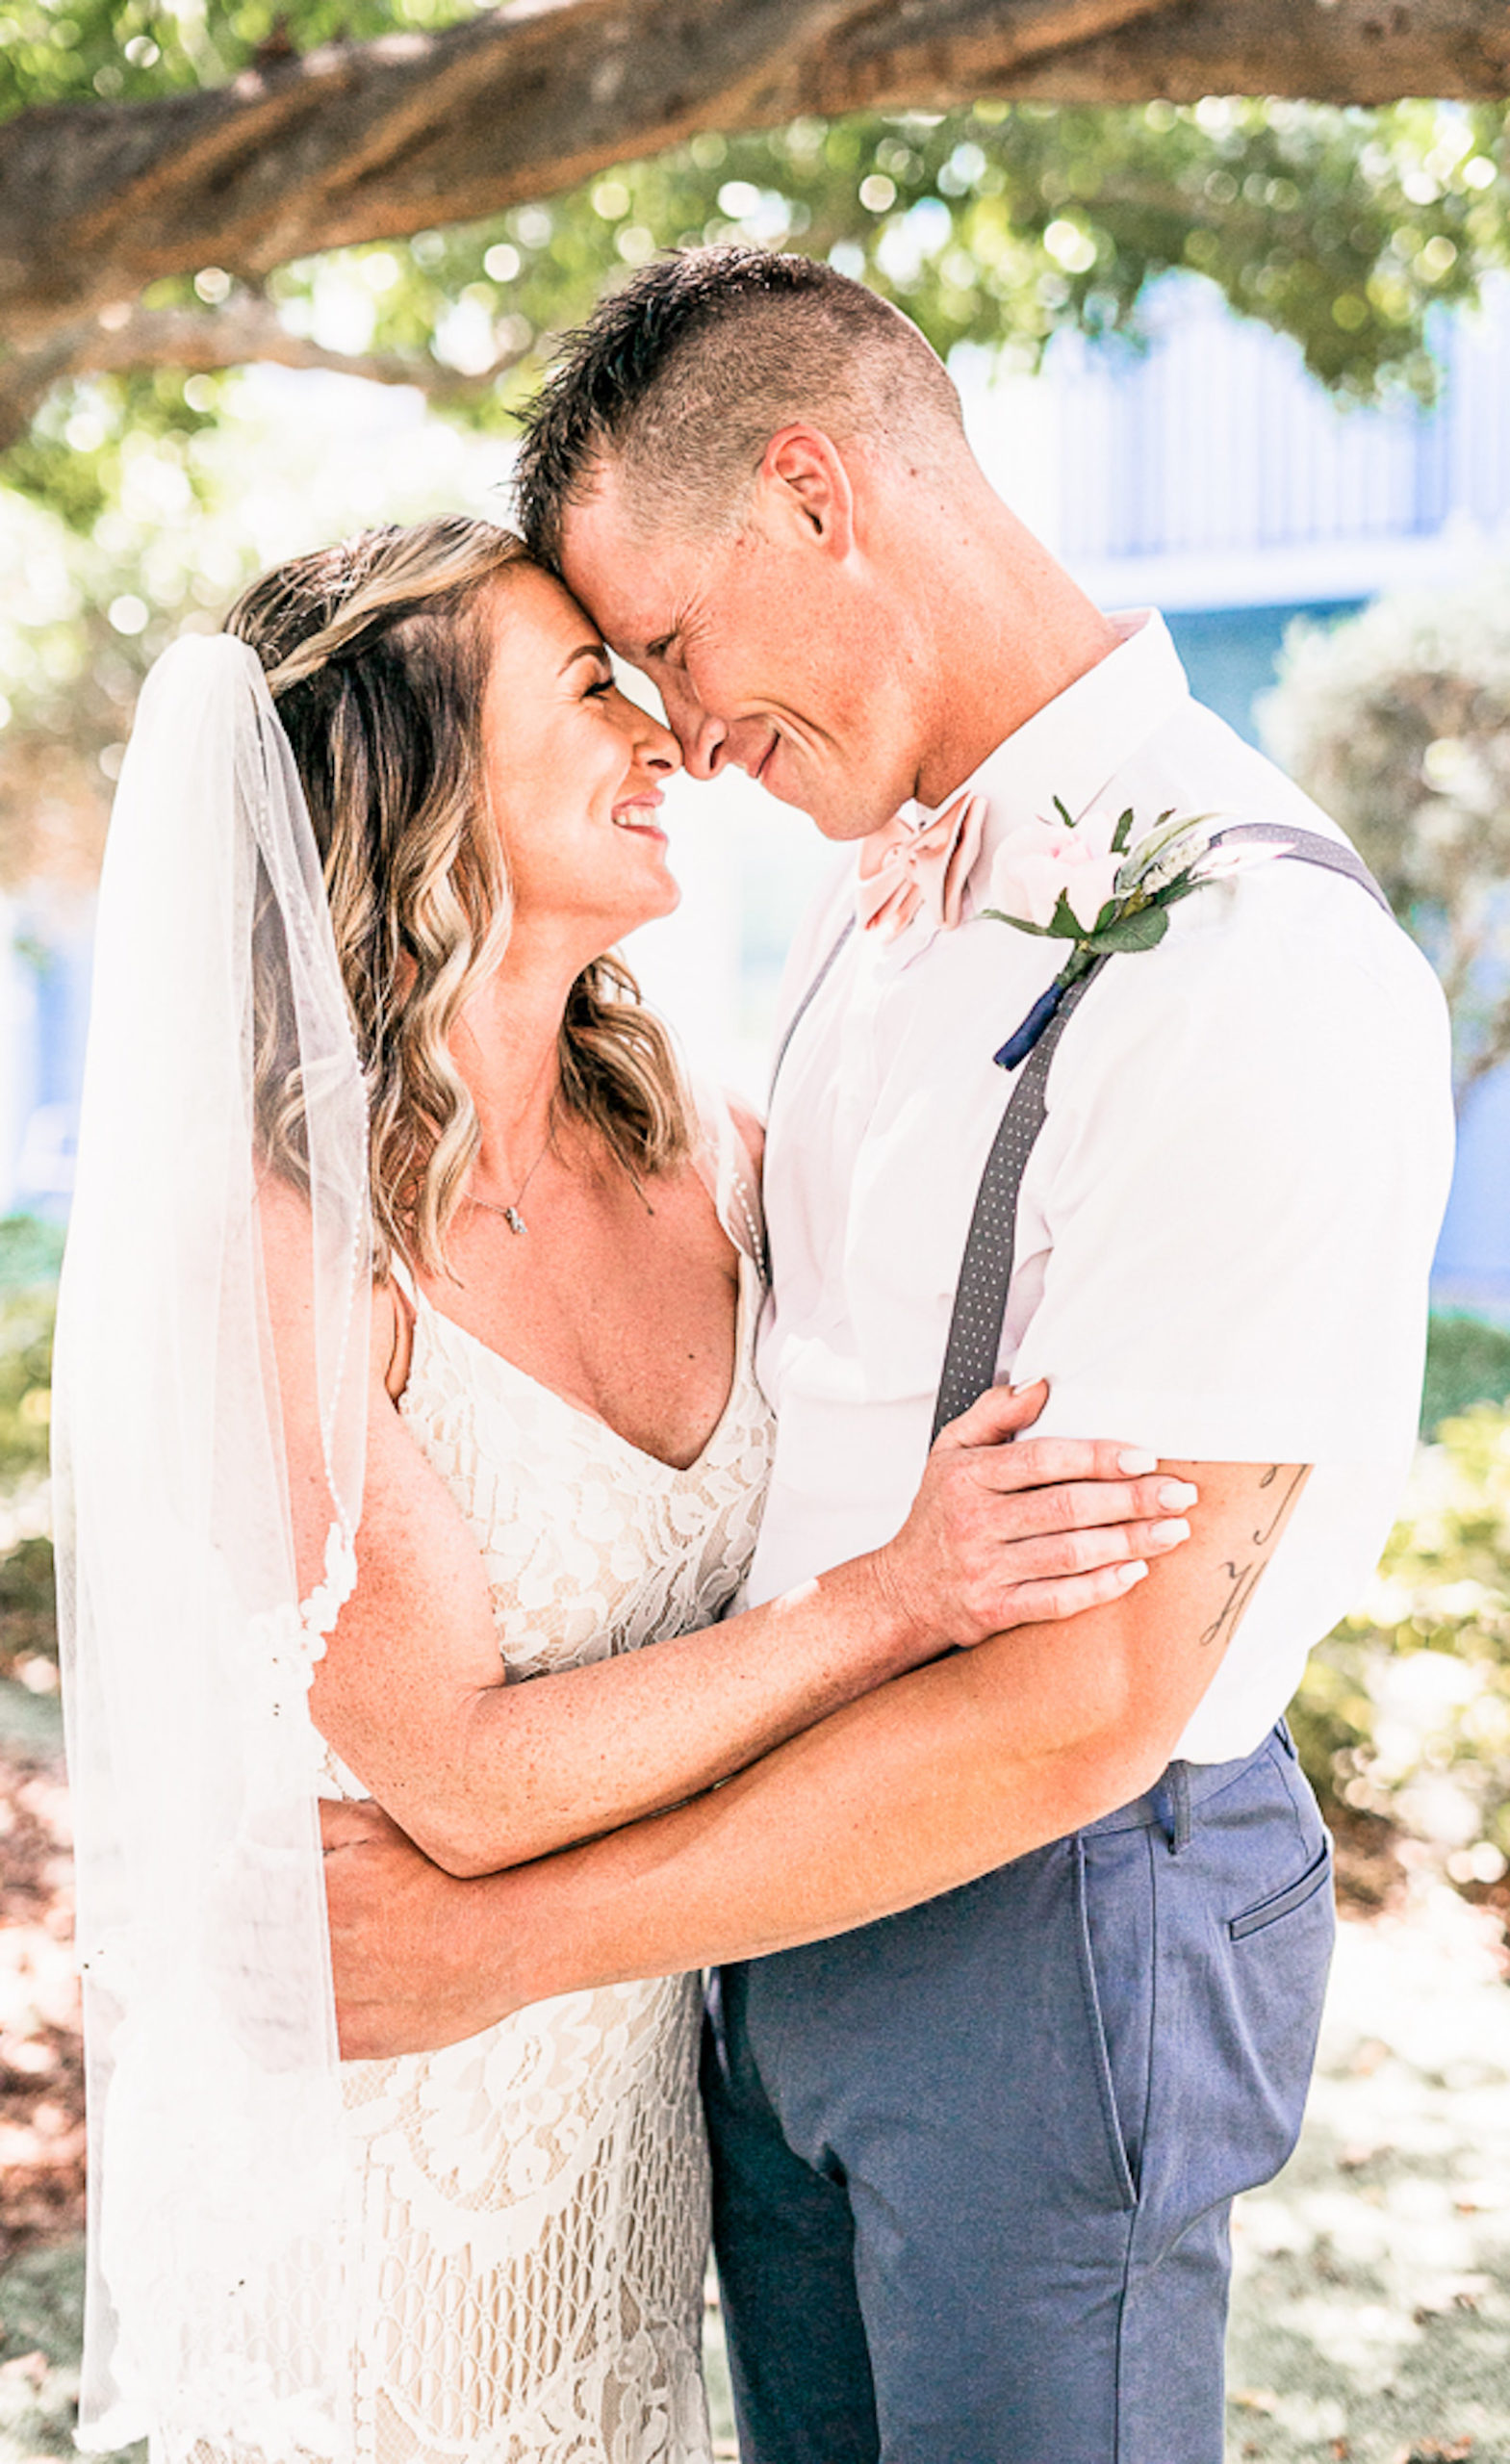 St. Petersburg Florida Wedding | Outdoor Bride and Groom Portrait at Wedding Venue Postcard Inn on the Beach | Groom Navy Blue Pants with White Short Sleeve Shirt and Suspenders and Flip Flops | Lace Sheath Spaghetti Strap V Neck Boho Bridal Gown Wedding Dress